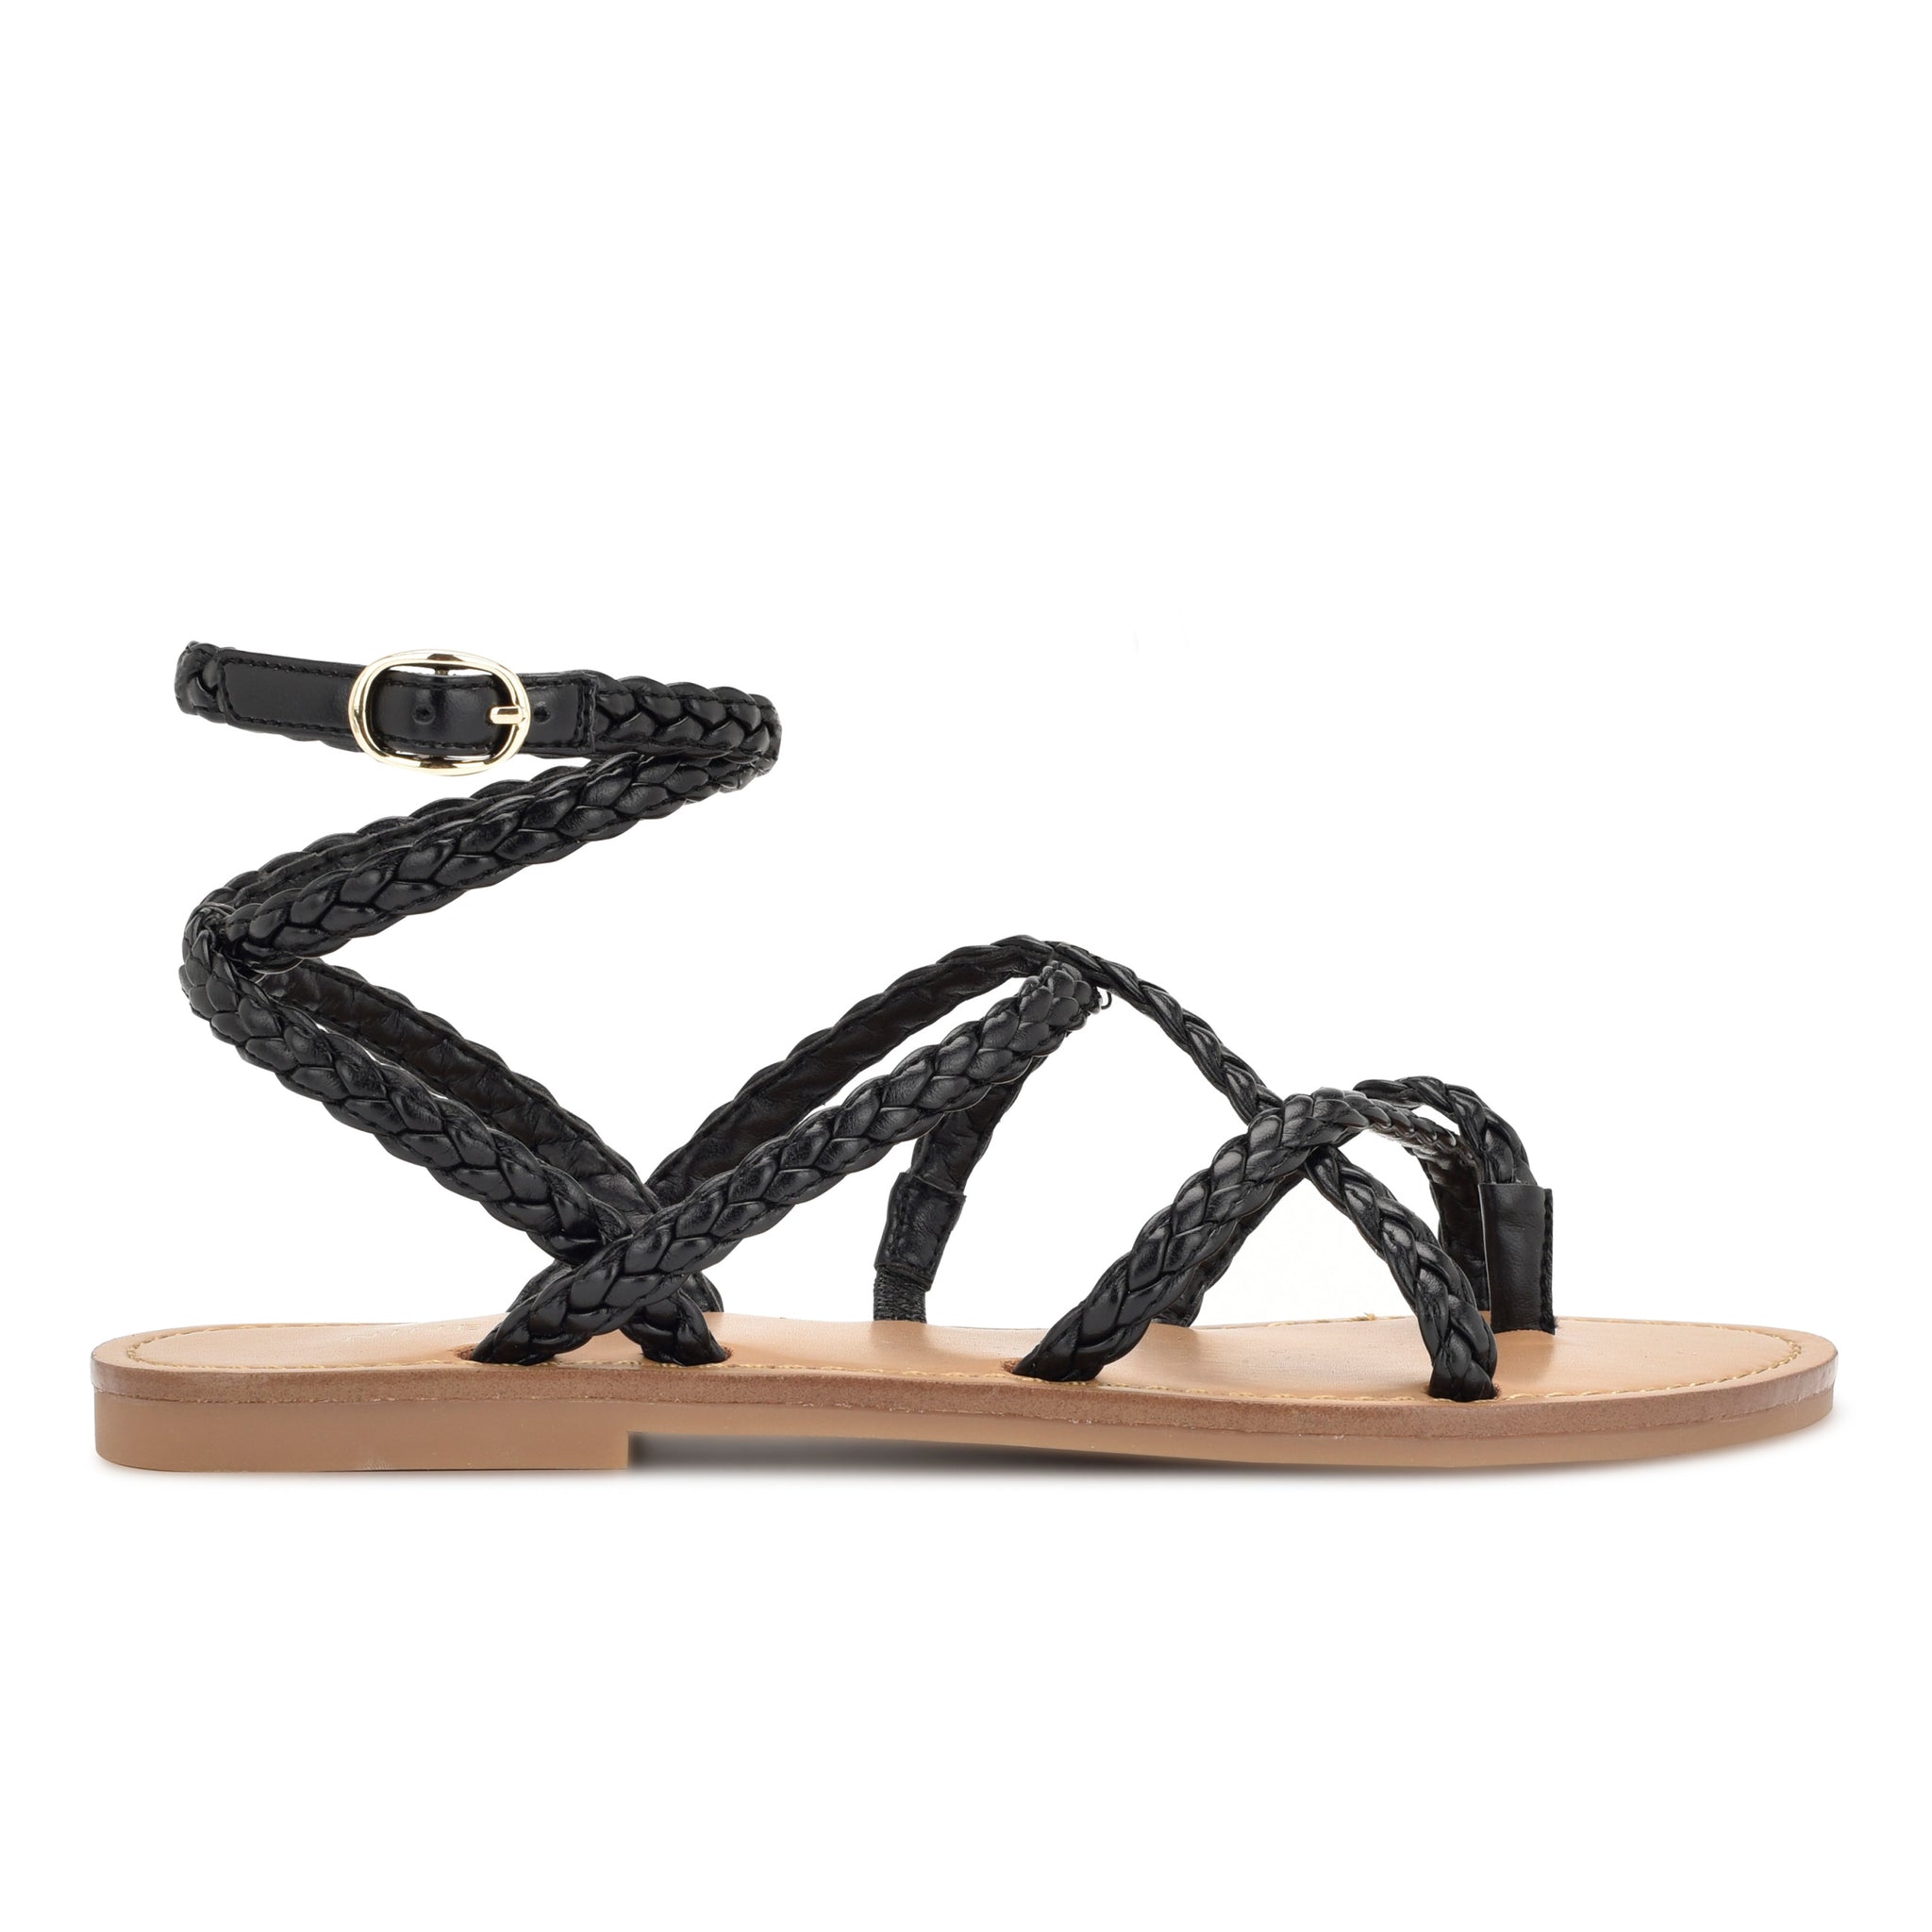 NINEWEST Coralin Ankle Wrap Flat Sandals